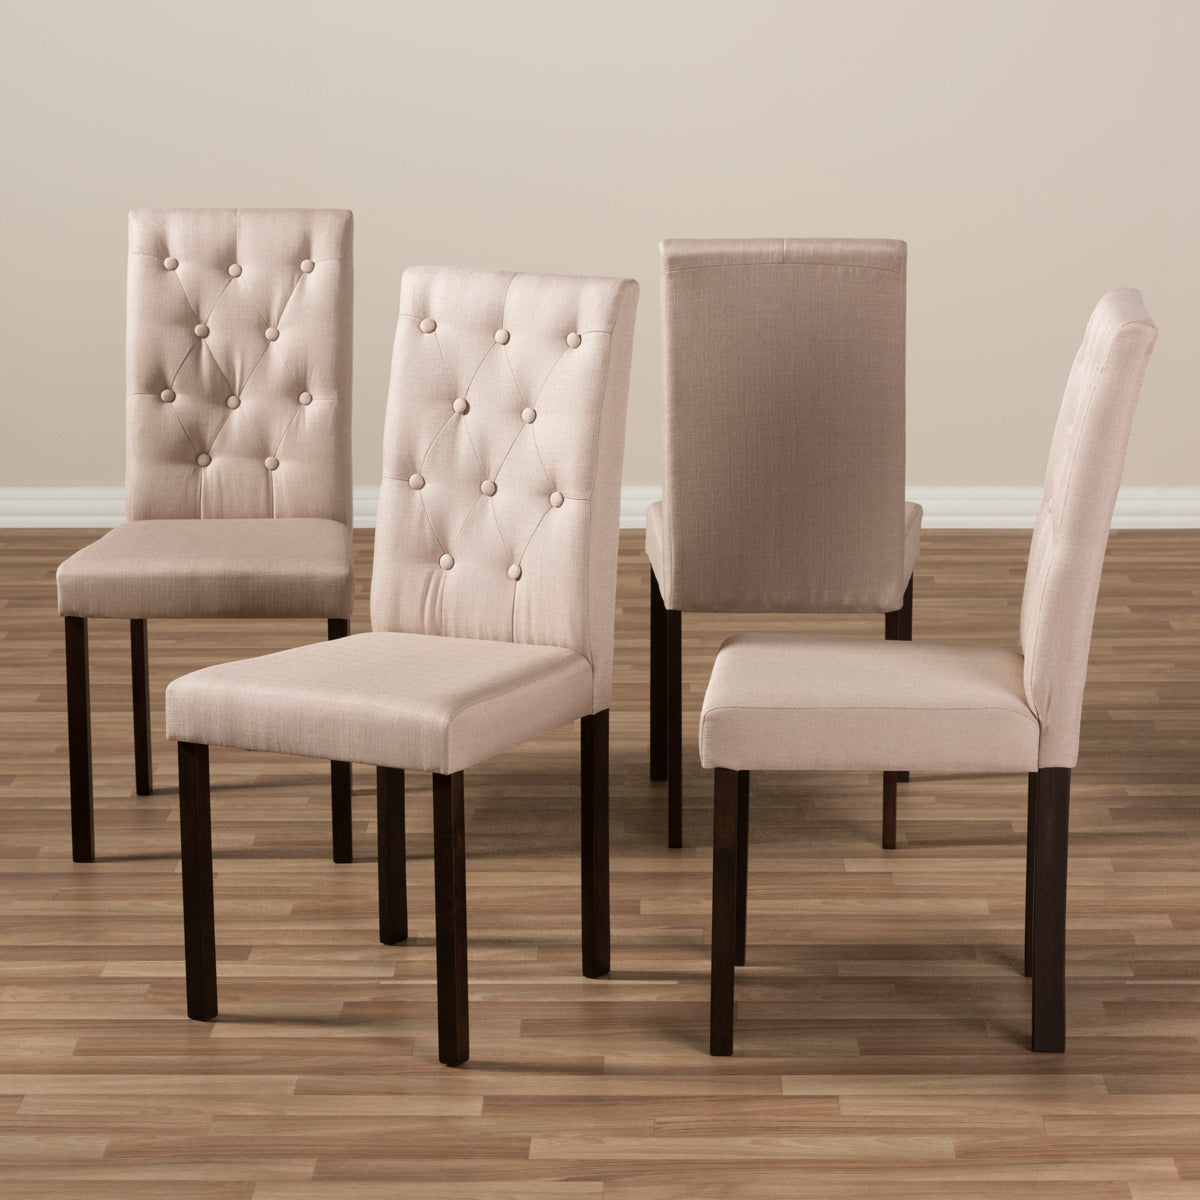 Baxton Studio Gardner Modern and Contemporary Dark Brown Finished Beige Fabric Upholstered Dining Chair (Set of 4) Baxton Studio-dining chair-Minimal And Modern - 5